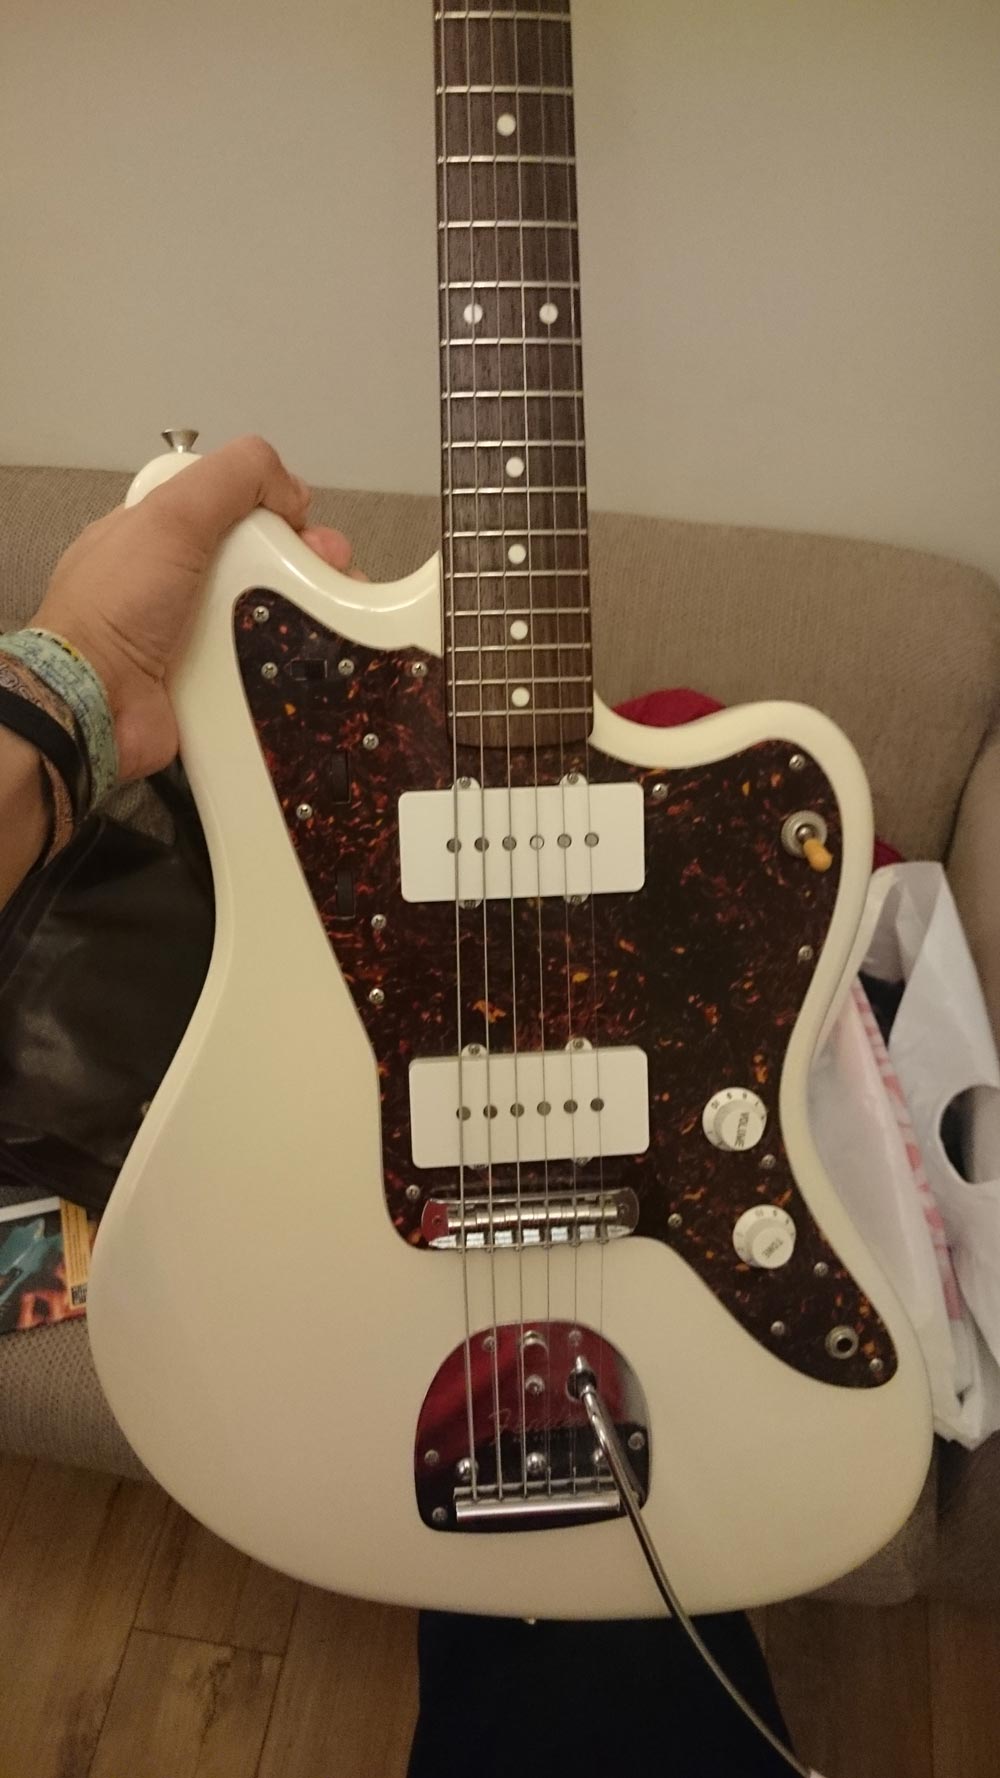 The Jazzmaster at the beginning